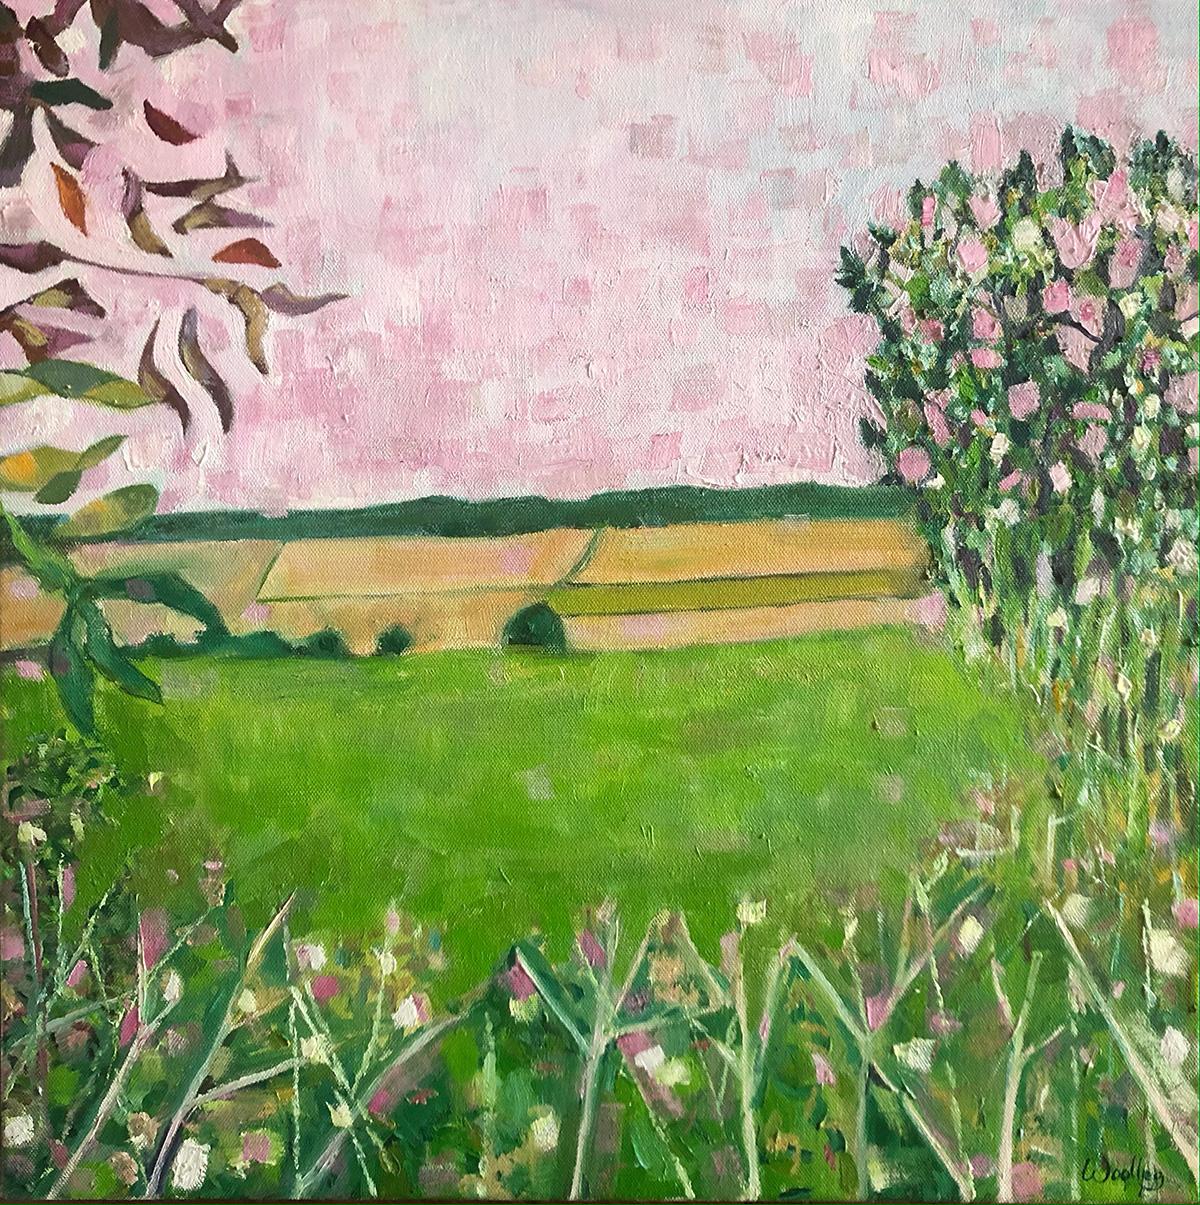 Eleanor Woolley  Figurative Painting - Towards Stow by Eleanor Woolley, Contemporary art, Impressionist painting 